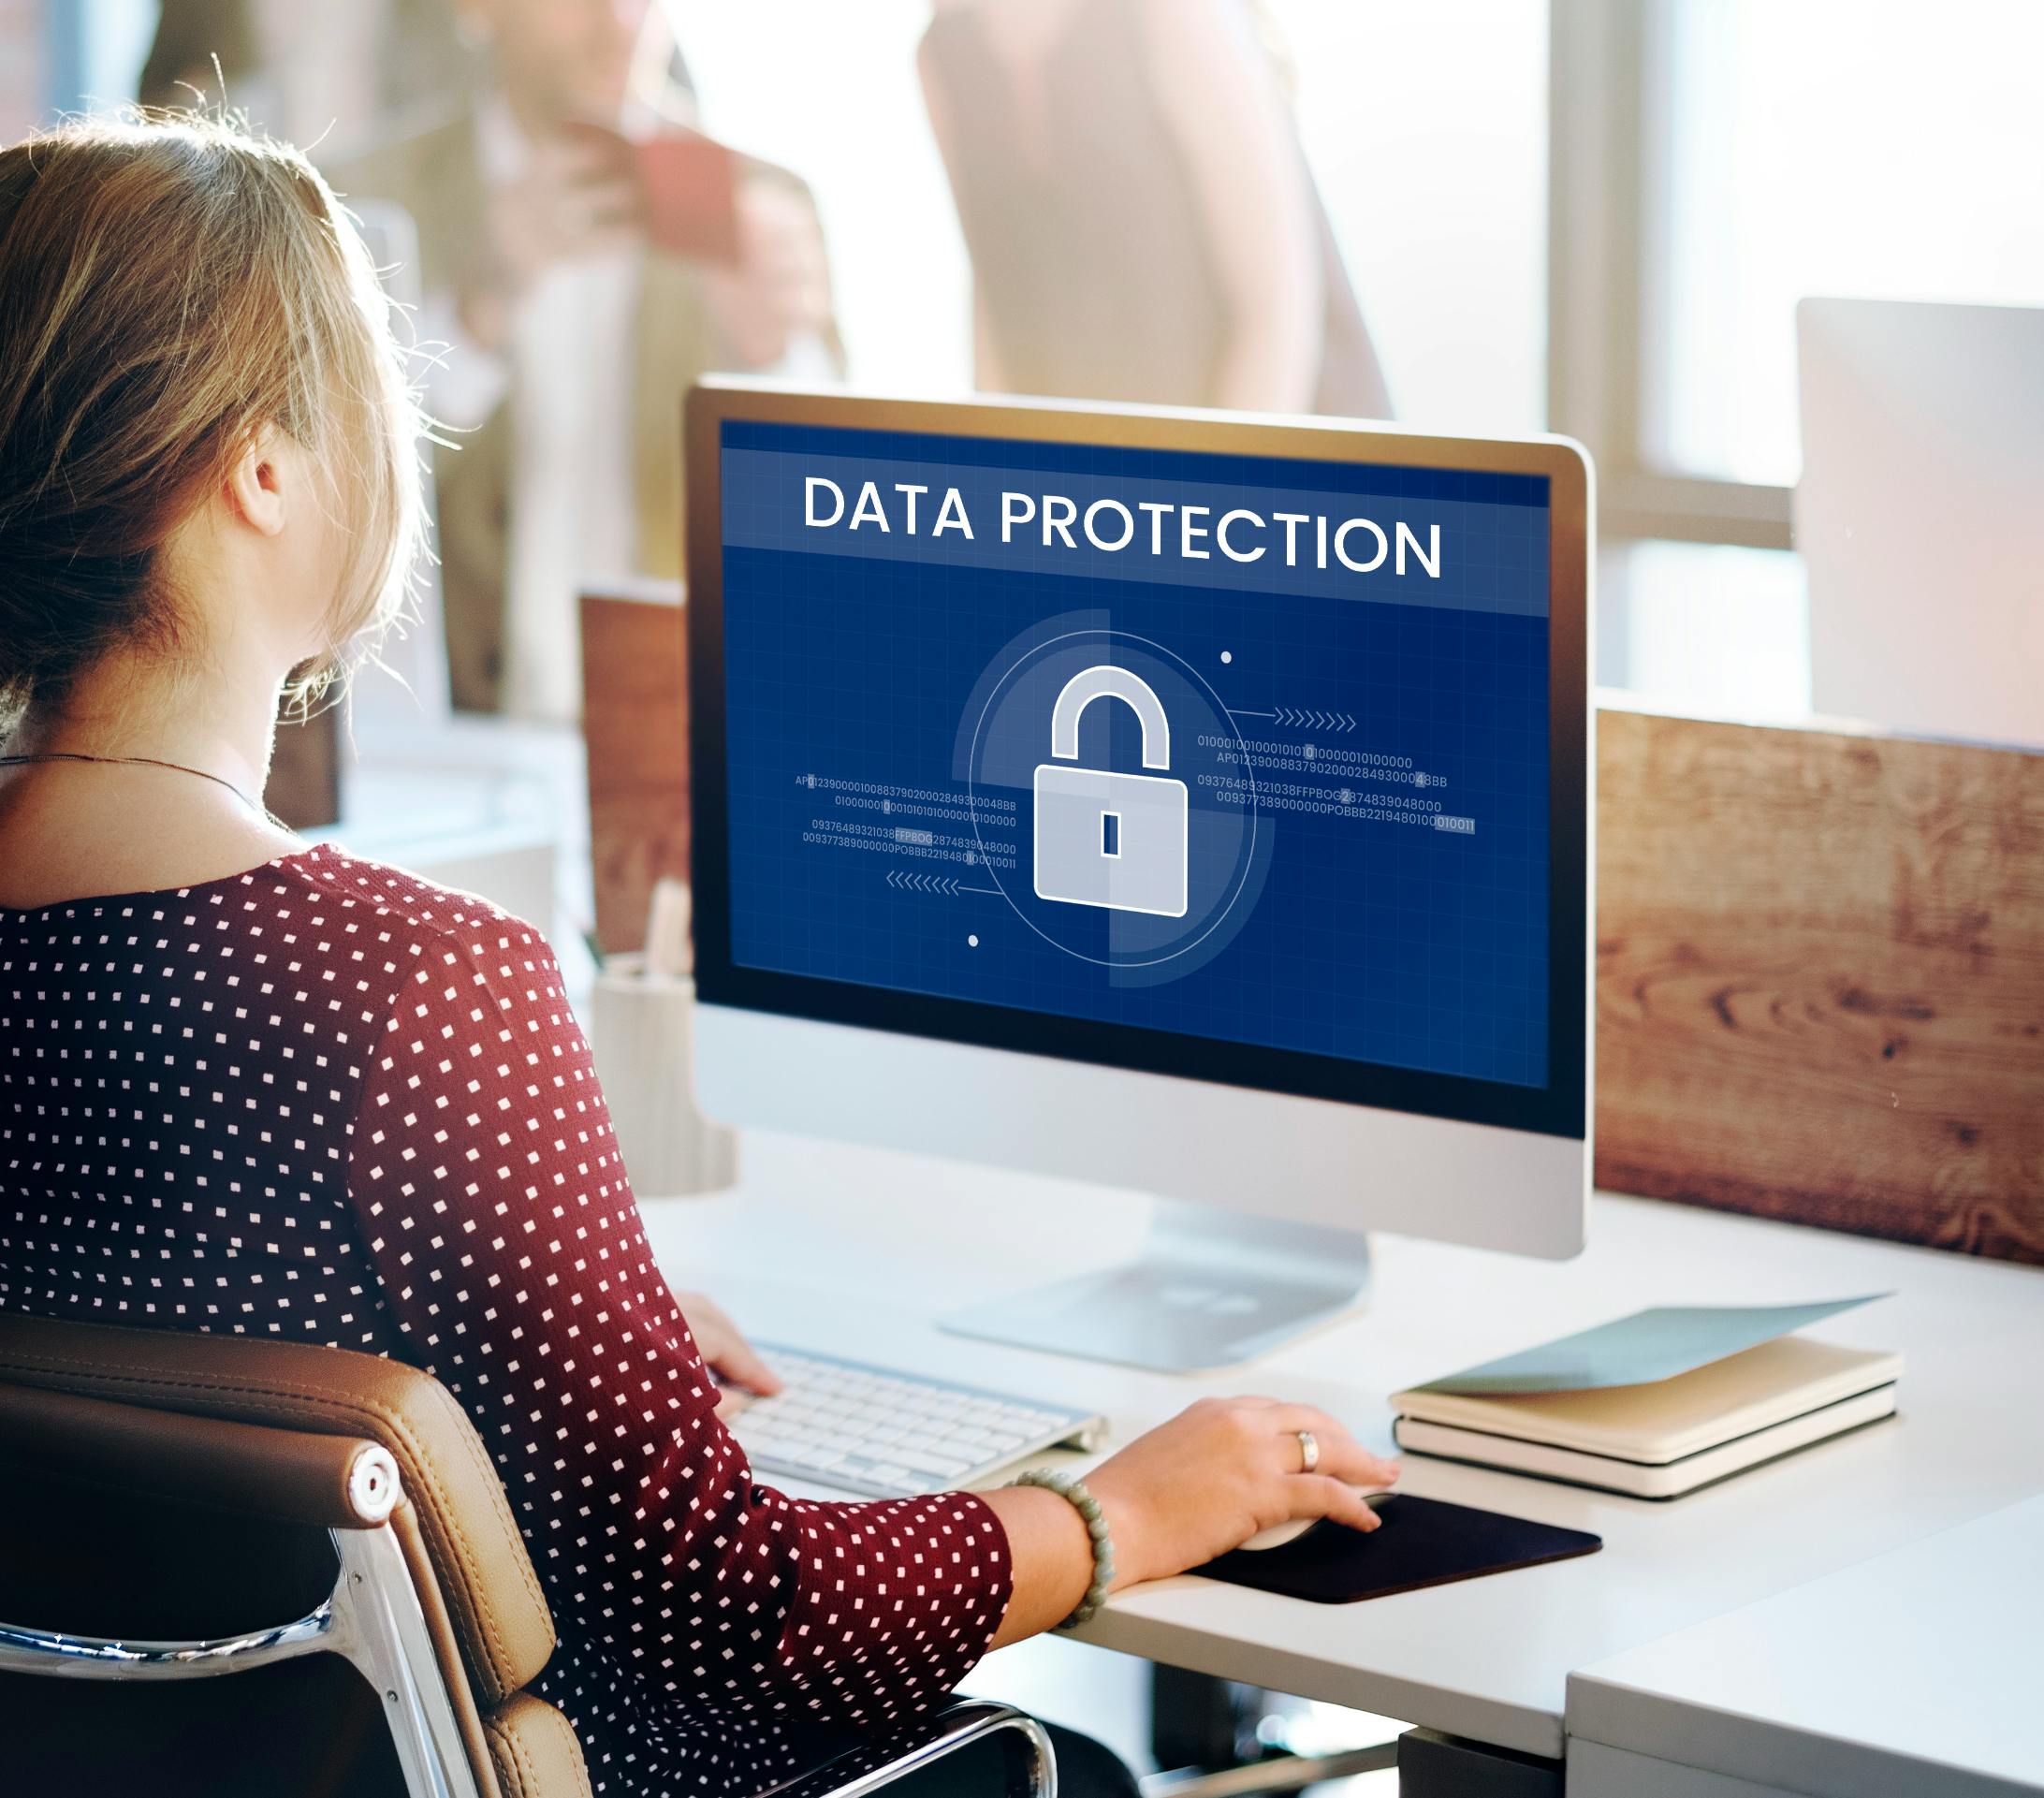 Women looking at a computer screen with "Data Protection" and a picture of a lock on the screen.